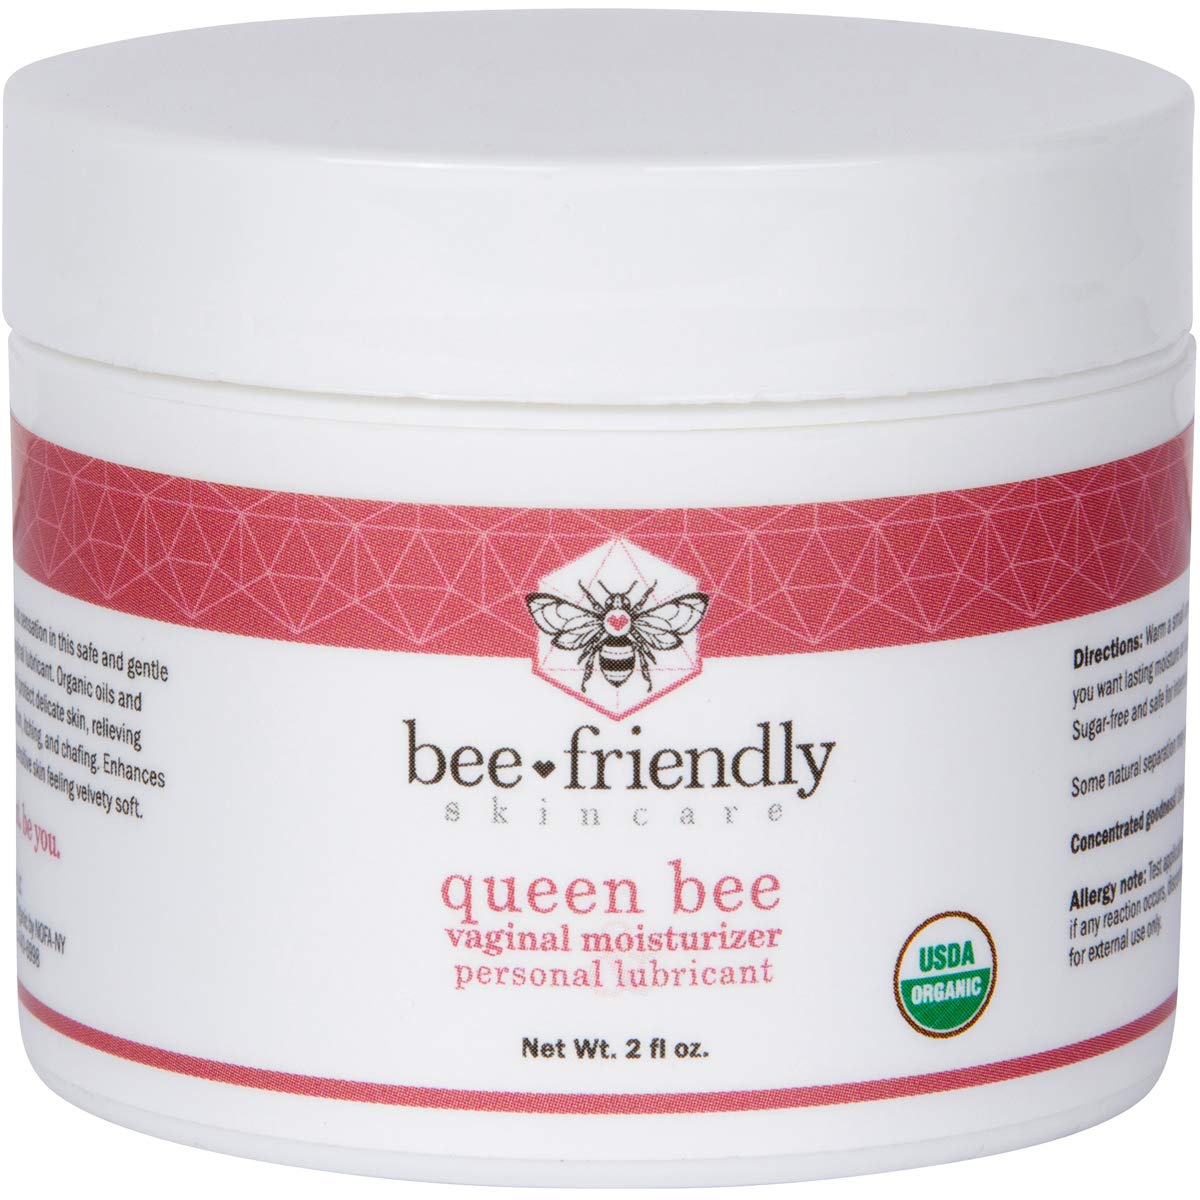 Organic Vaginal Moisturizer & Personal Lubricant By BeeFriendly, USDA Certified, Natural Vulva Cream For Dryness, Itching, Irritation, Redness, Chafing Of Vagina Due To Menopause & Thinning 2 oz